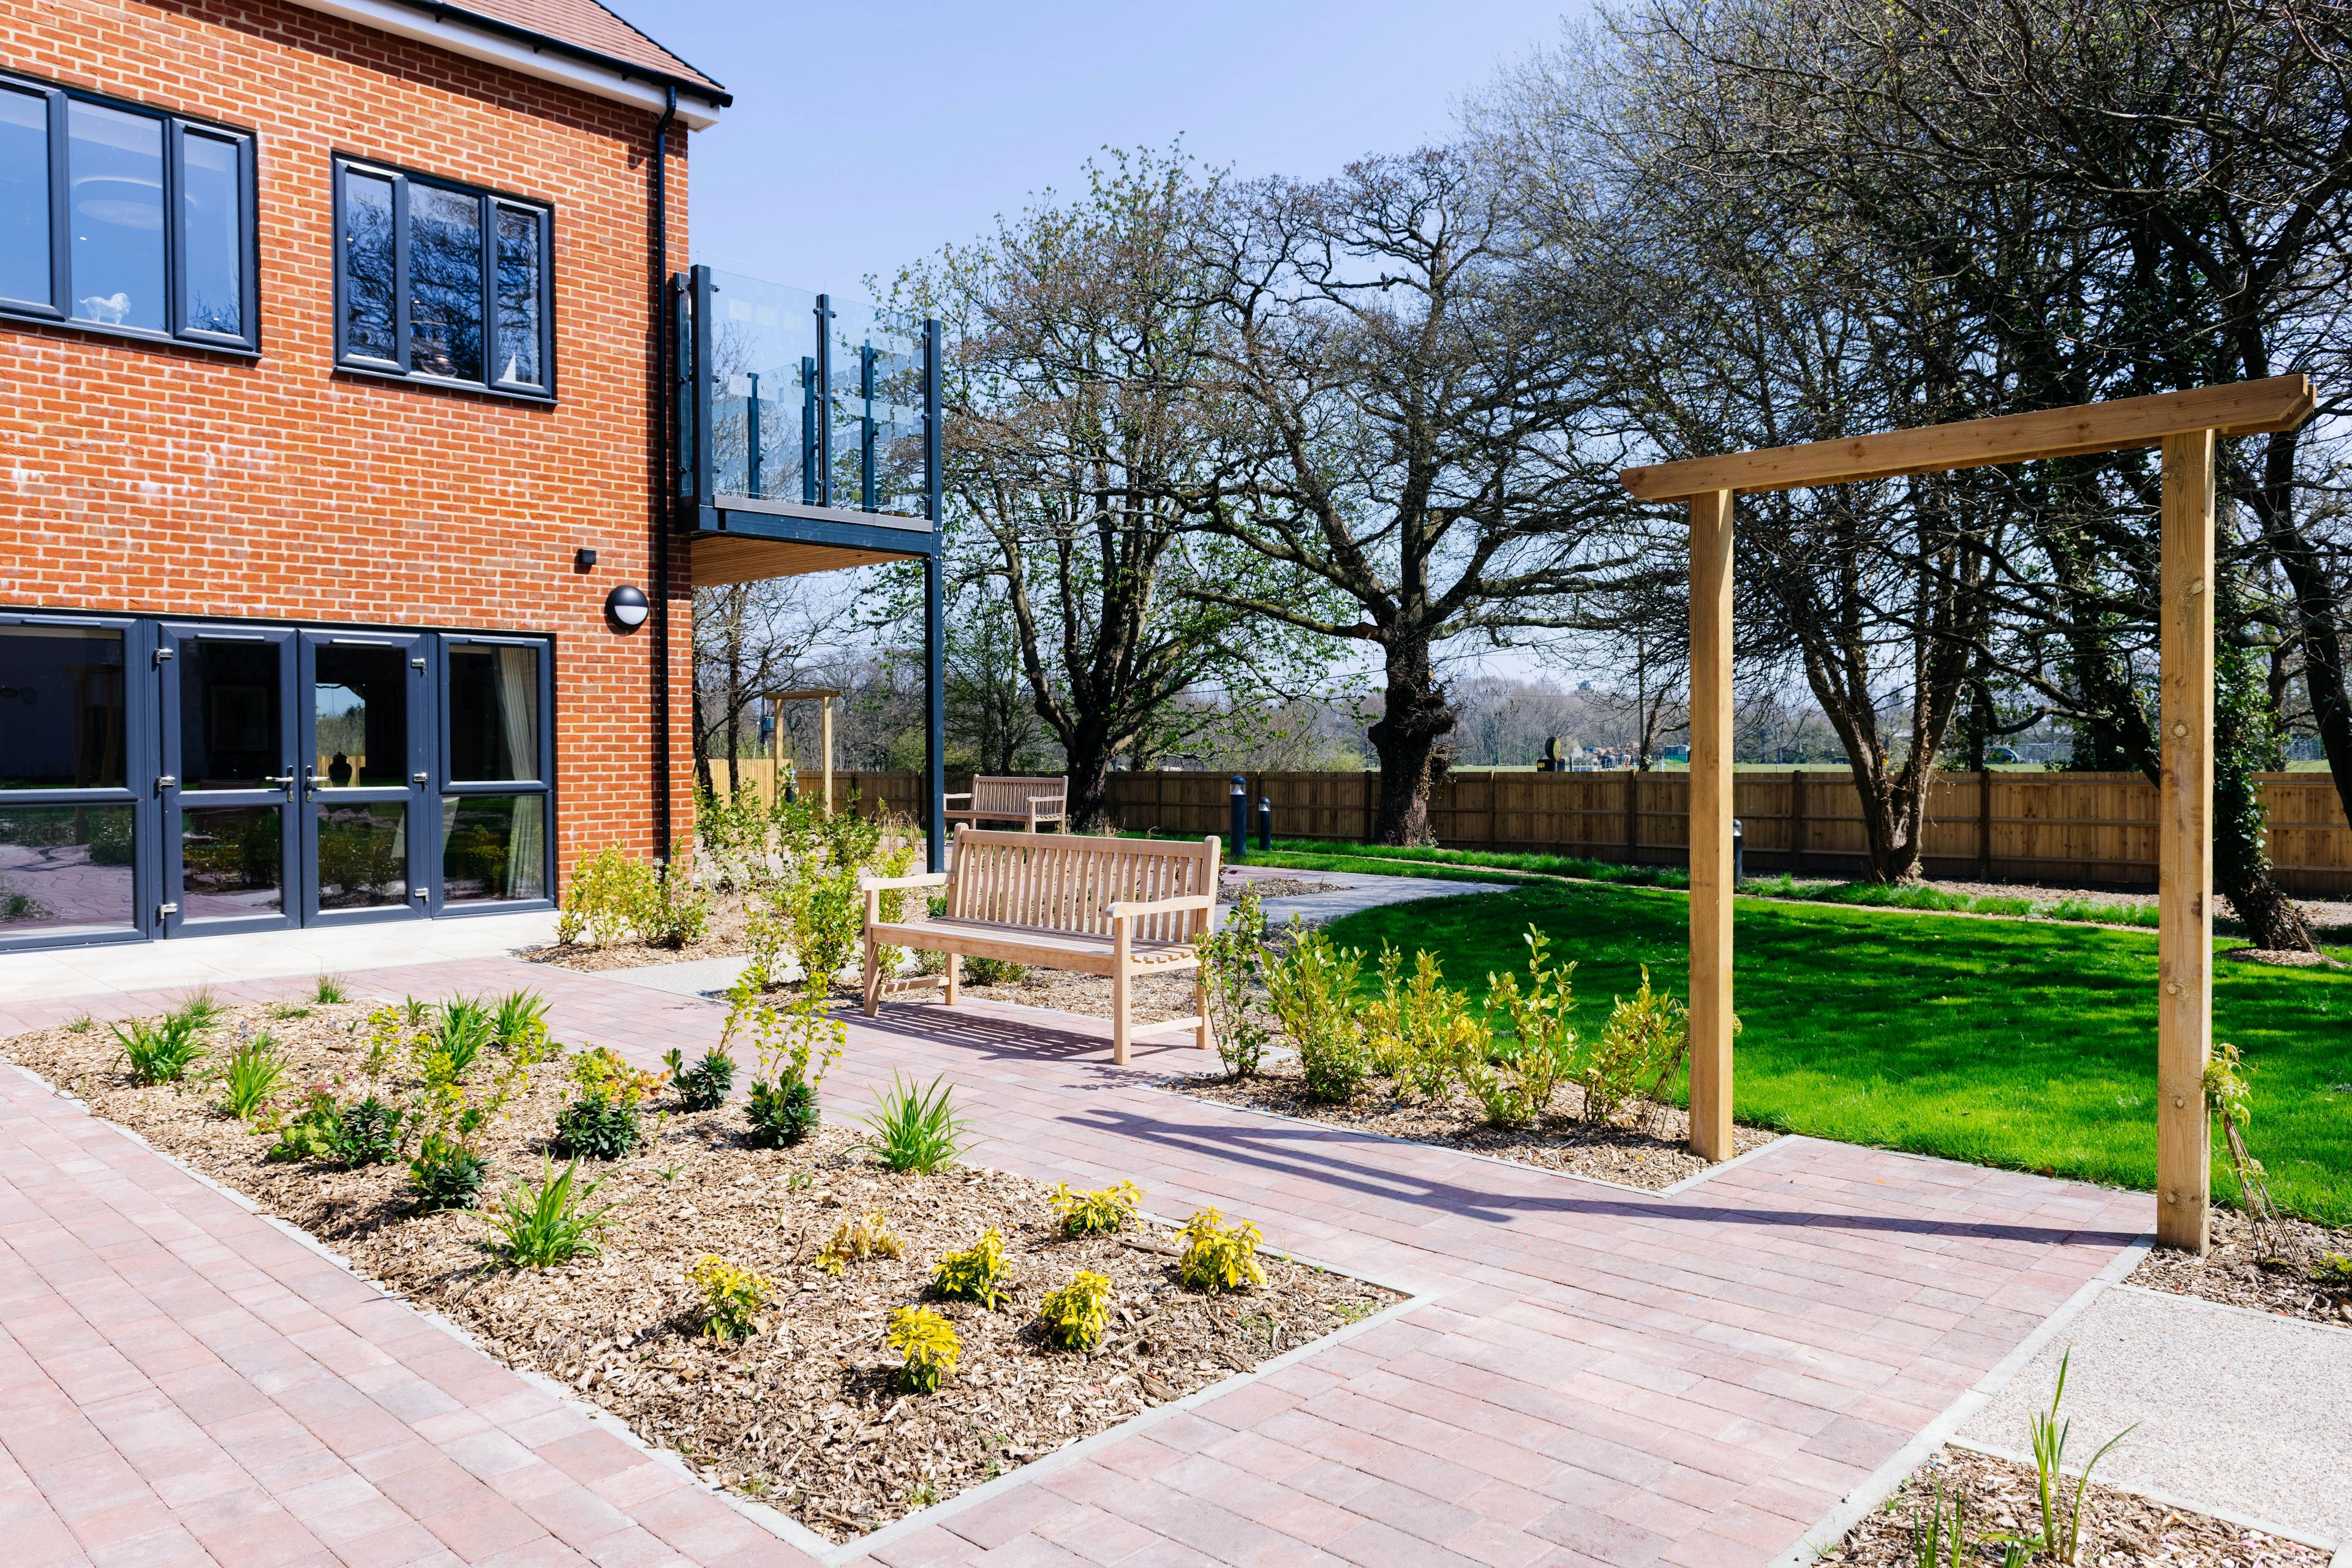 Garden at Snowdrop Place Care Home in Southampton, Hampshire